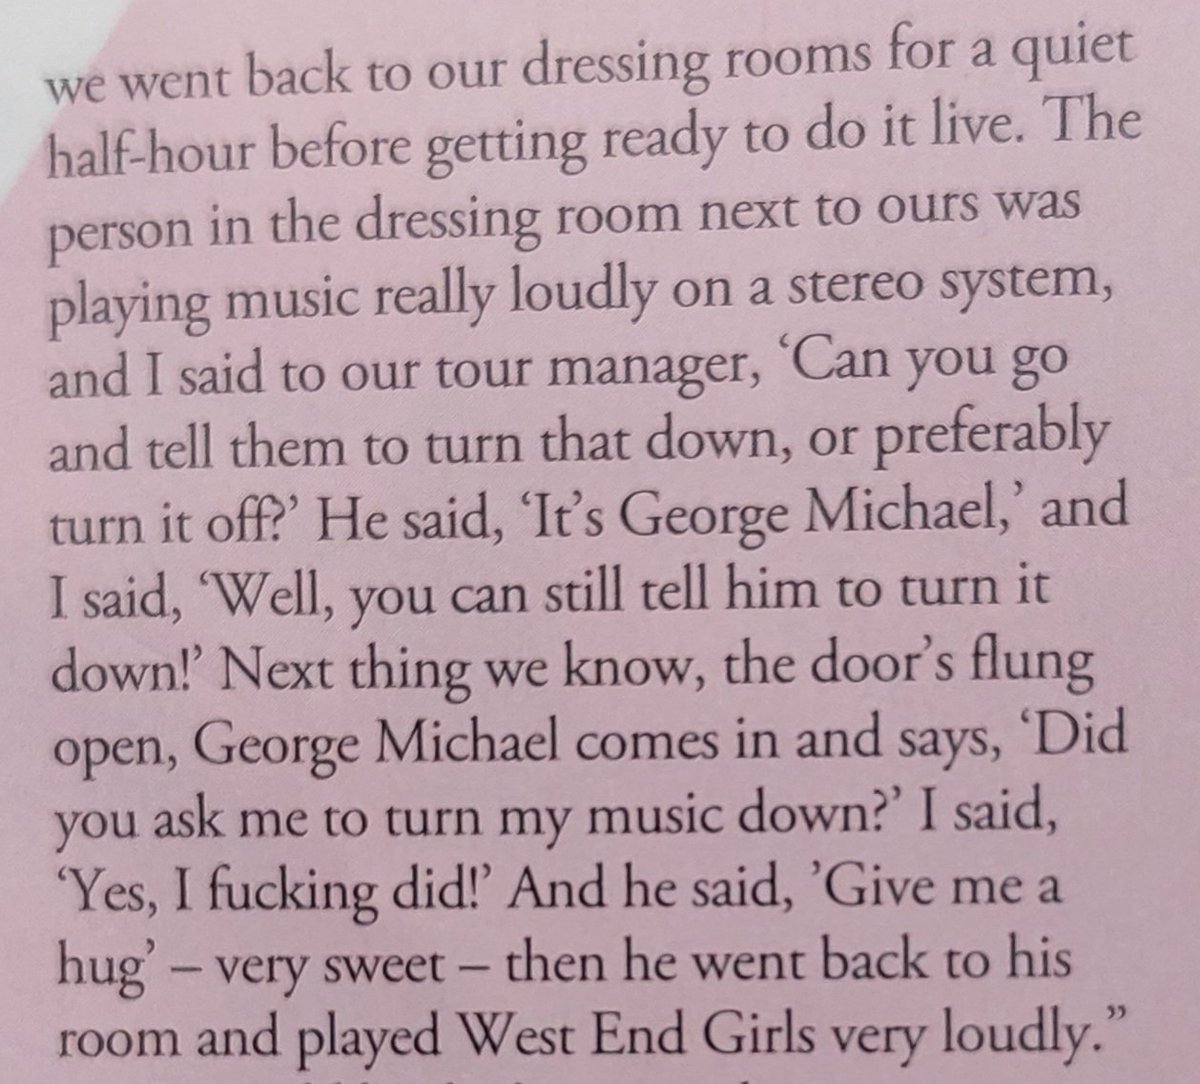 Love this Pet Shop Boys story about George Michael at the 2012 Olympic closing ceremony, from @petepaphides' fantastic @RecCollMag interview.